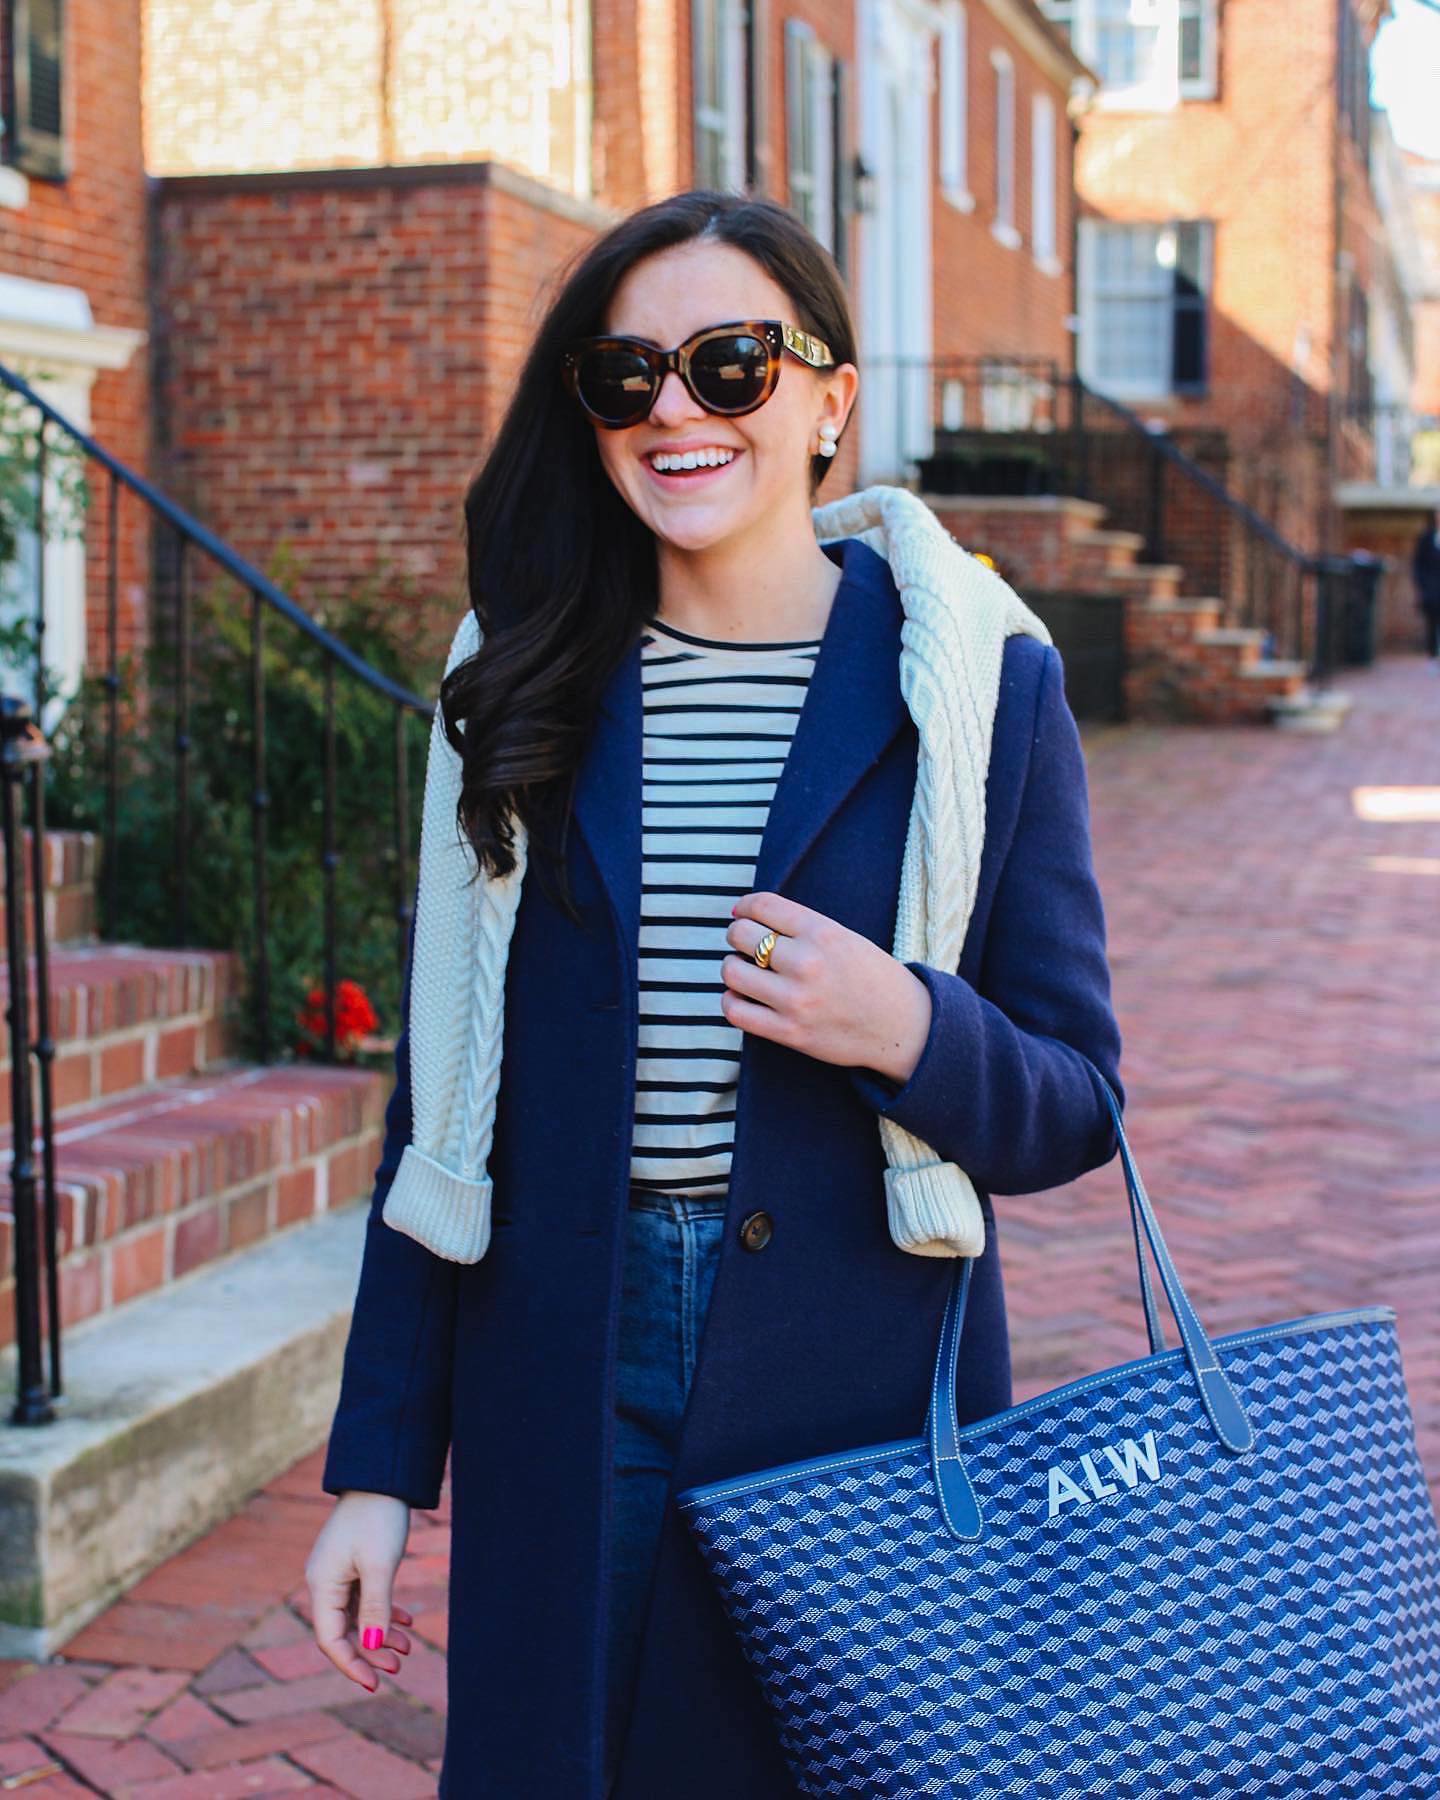 Chic personalized navy blue tote bag ideal for everyday style for her